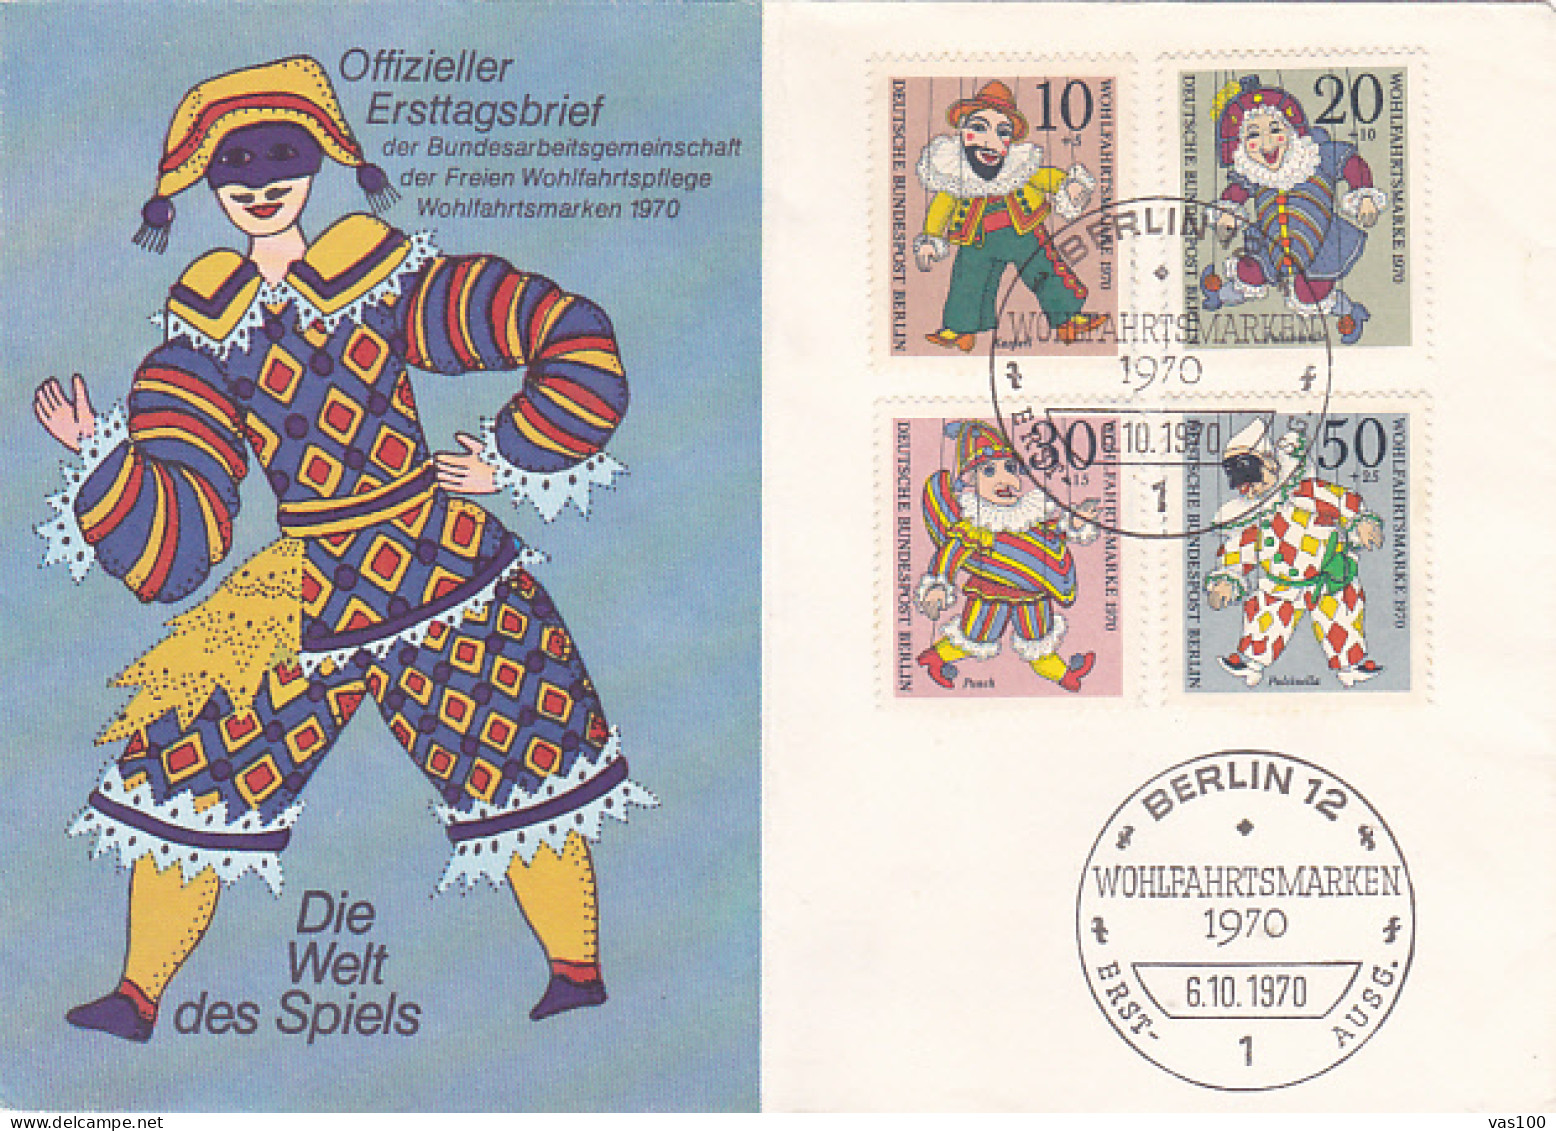 CHILDRENS, PUPPETS, CHARITY STAMPS, COVER FDC, 1970, GERMANY - Marionetas